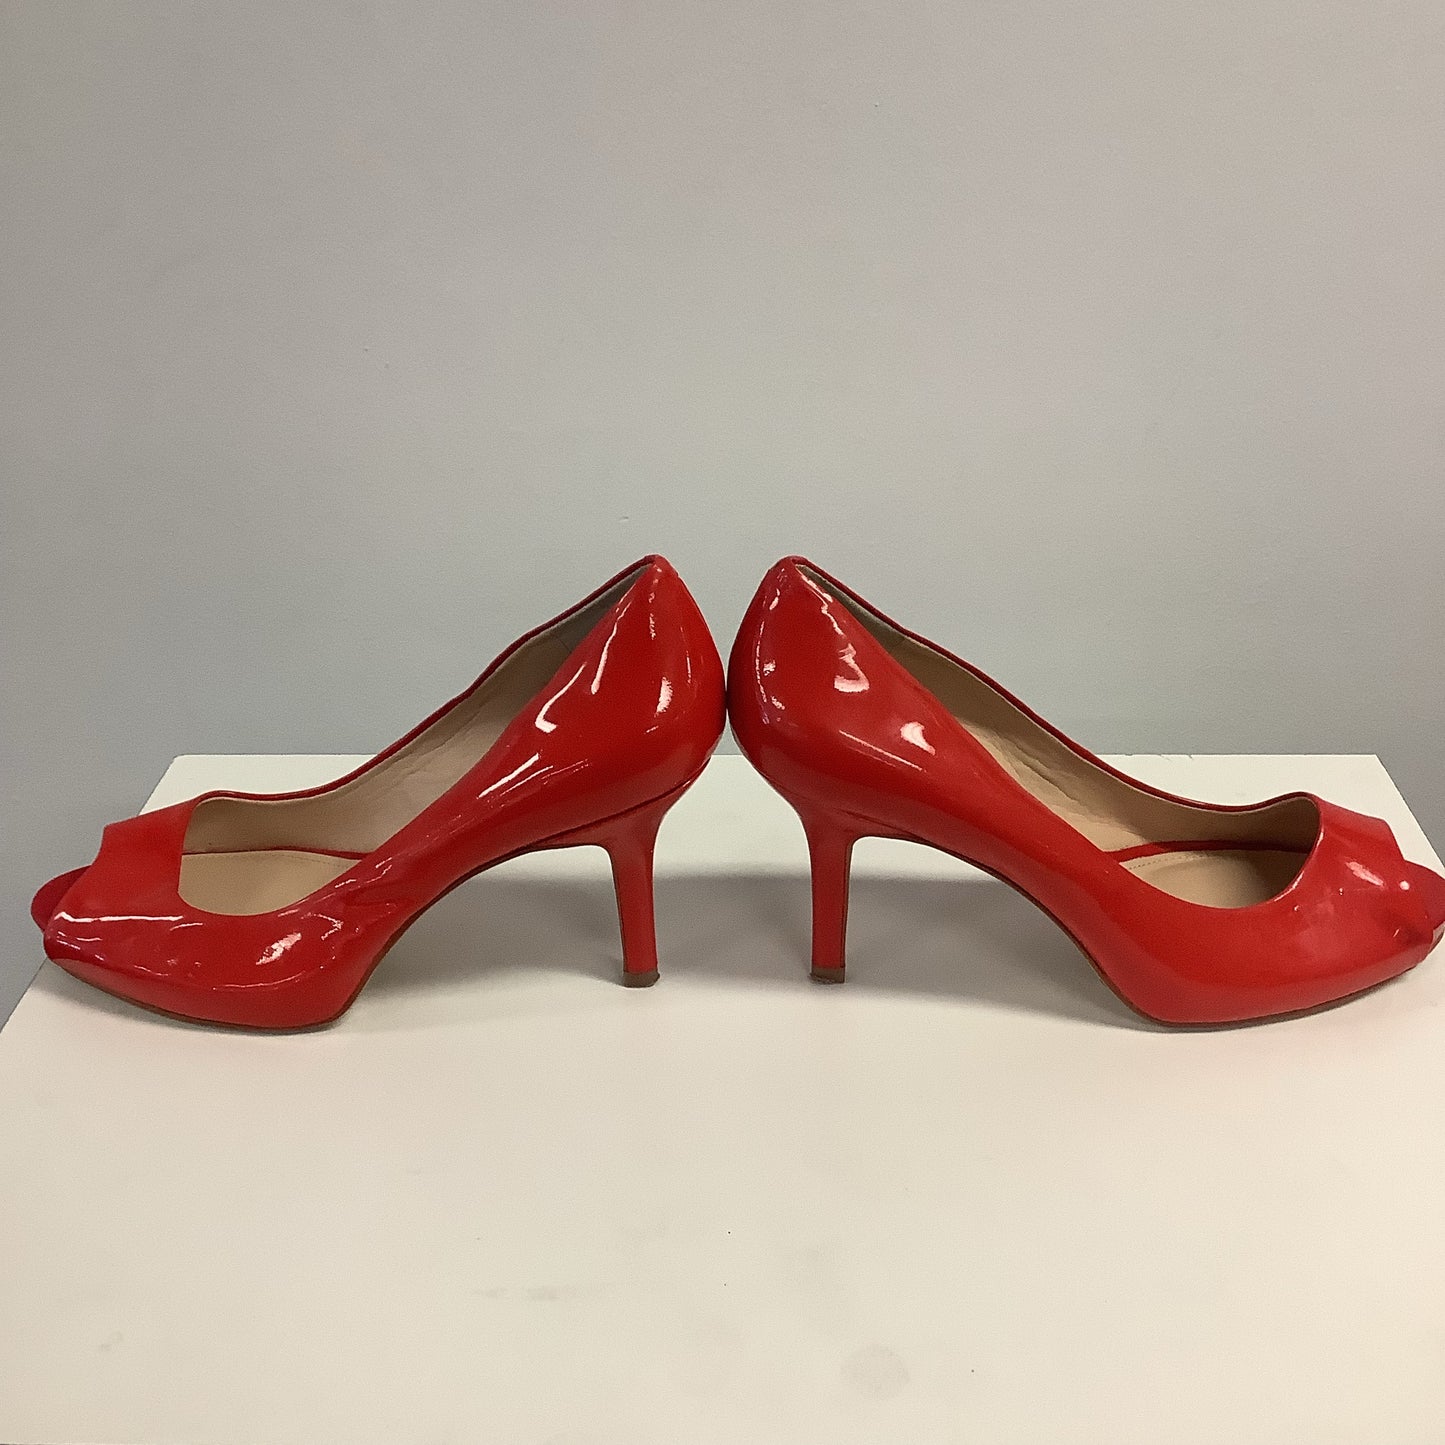 Vince Camuto Red Heels Size 9M/39